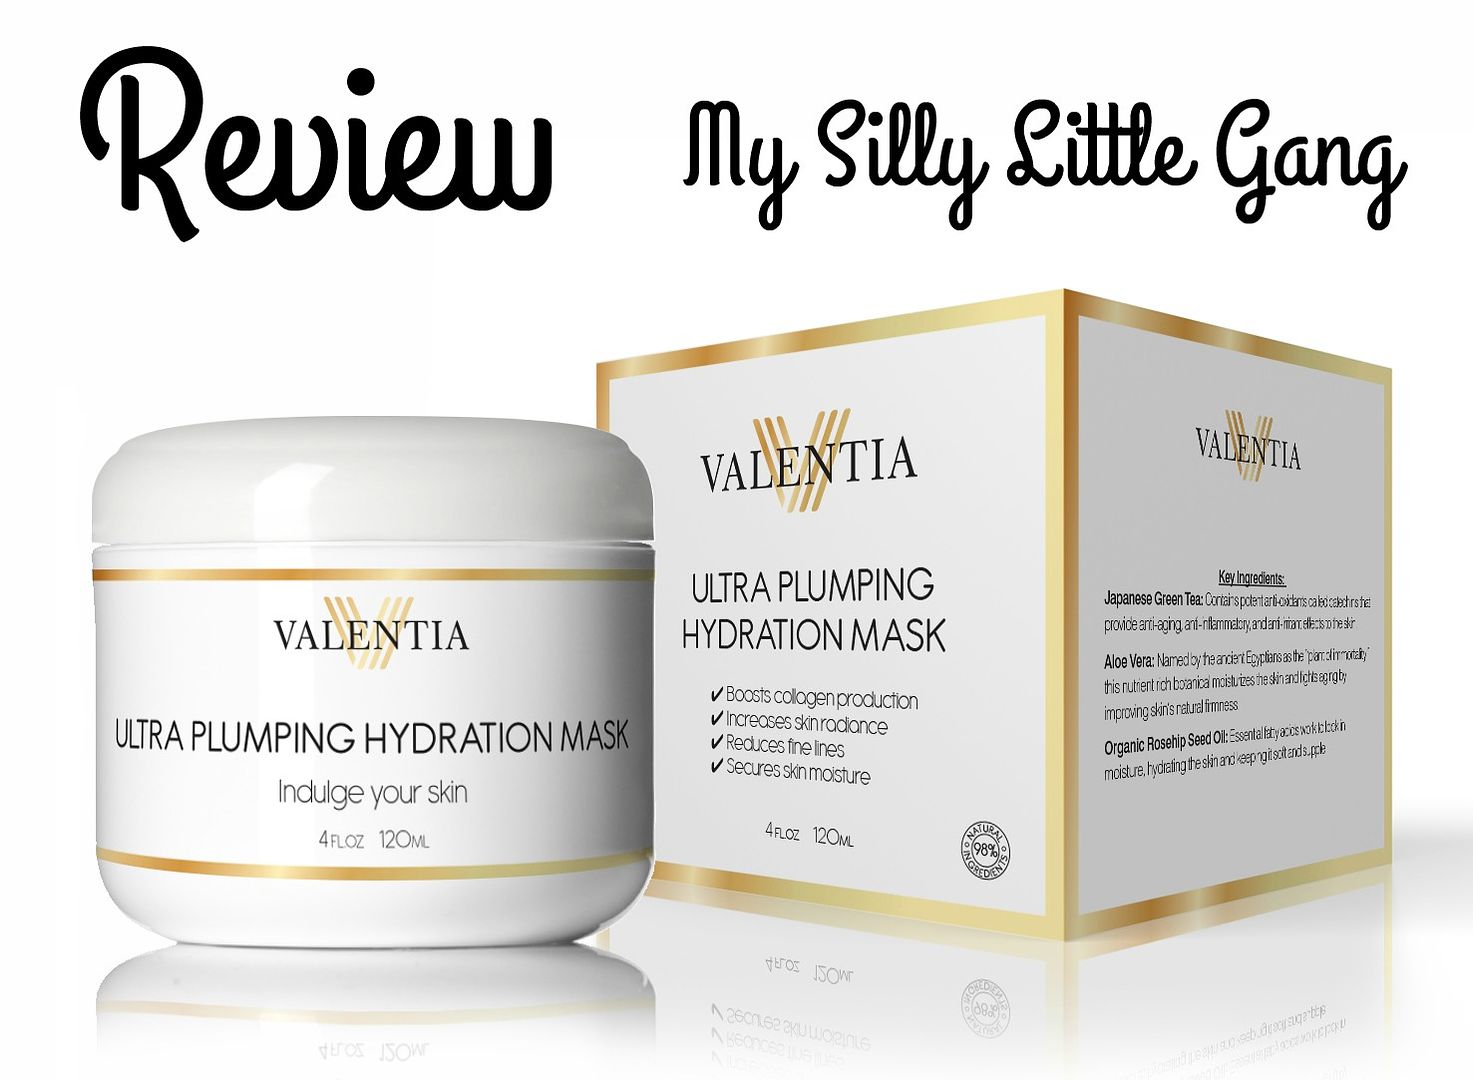 amazing plumping hydration mask from Valentia